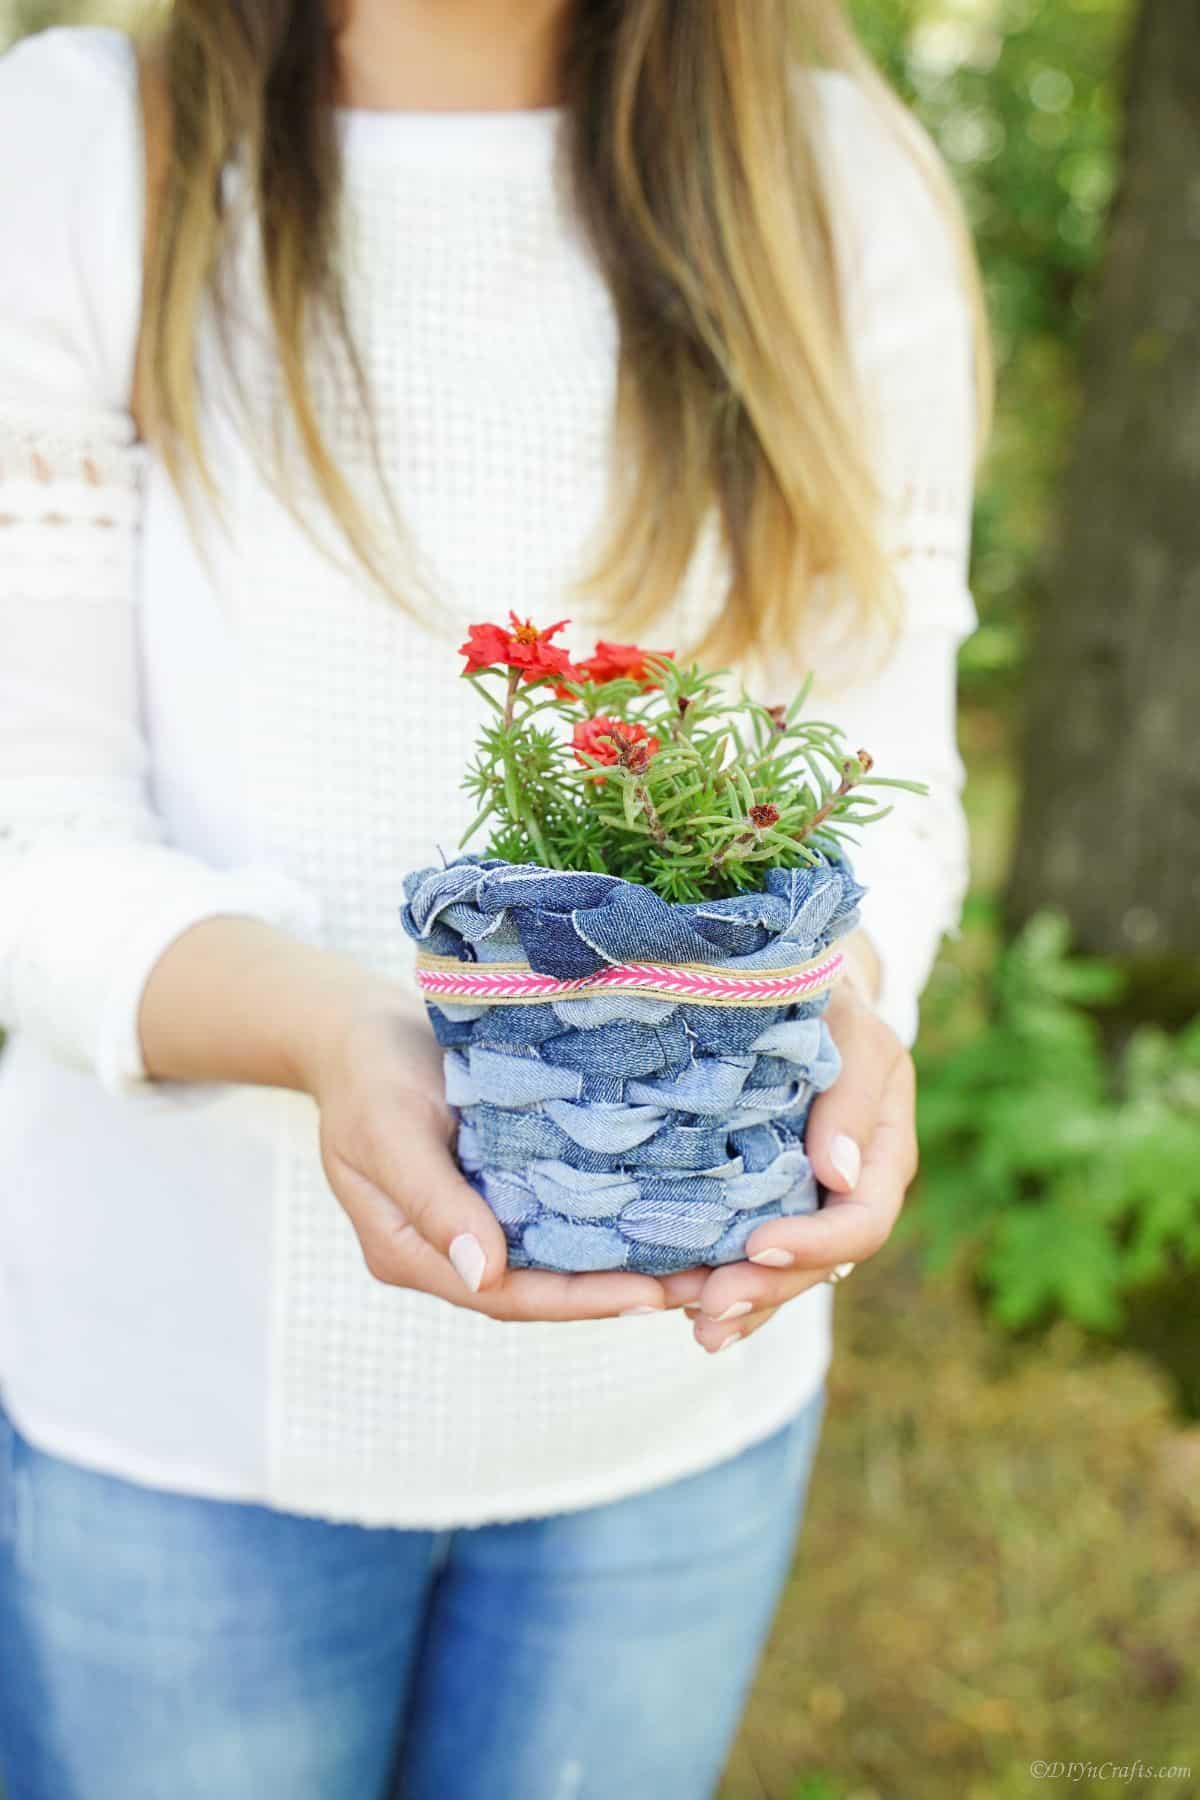 red flowers in blue jeans basket held by woman